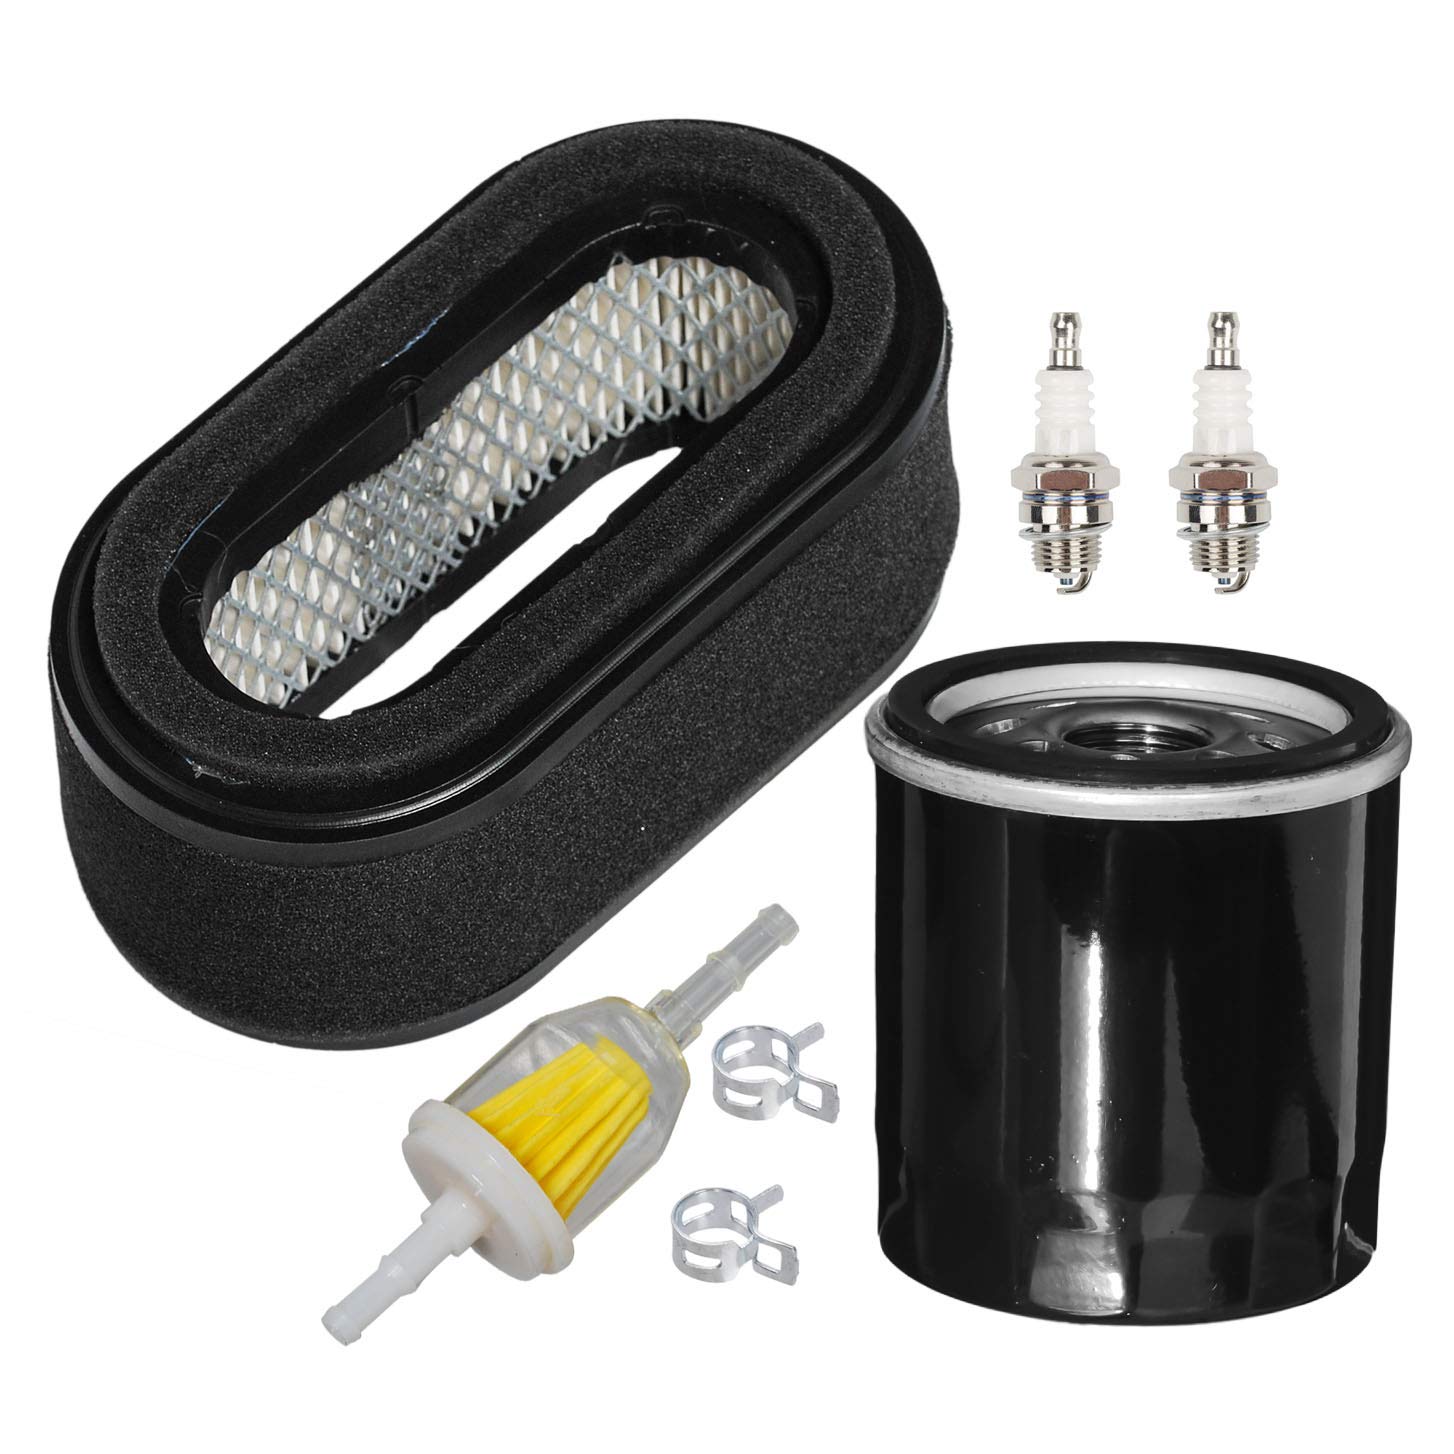 HIFROM Air Filter Combo Pre-Filter Oil Fuel Filter Spark Plug Tune Up Kit Compatible with Kawasaki FD501V John Deere LX178 LX188 11013-2206 MIU11377 49065-7010 von hifrom